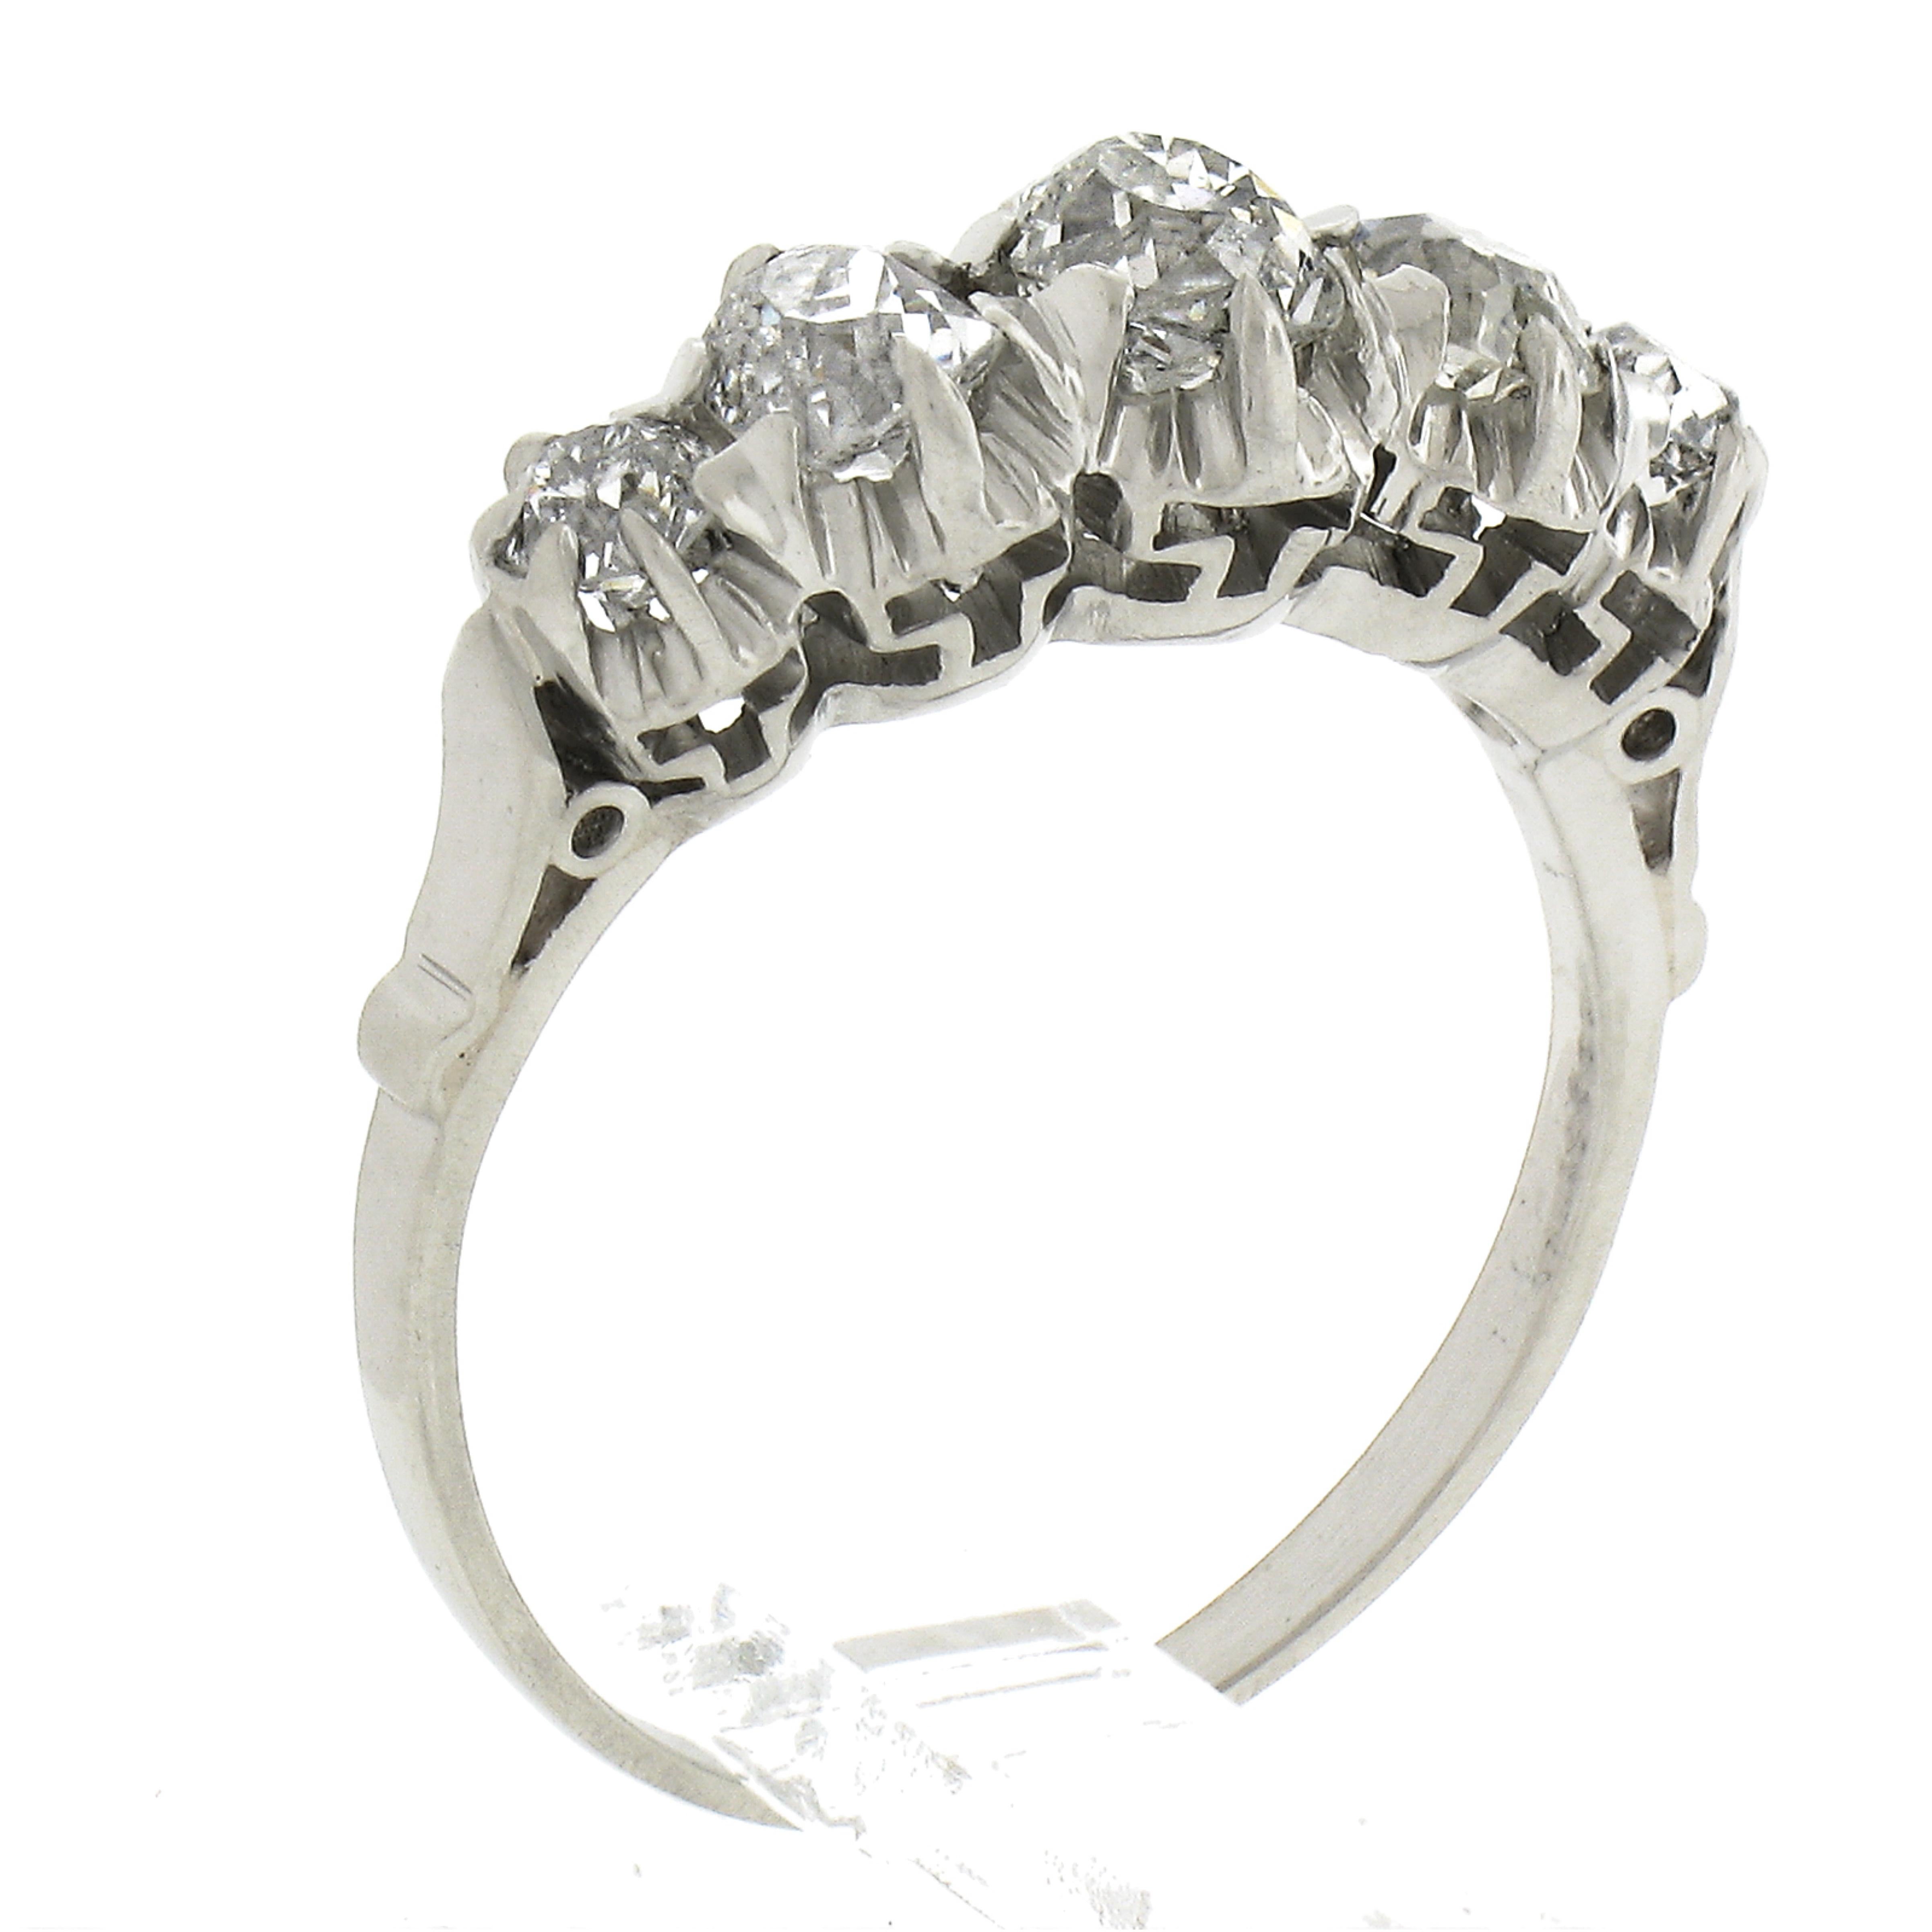 Antique Edwardian Platinum GIA Graded 1.15ct Diamond Stackable 5 Stone Band Ring For Sale 4